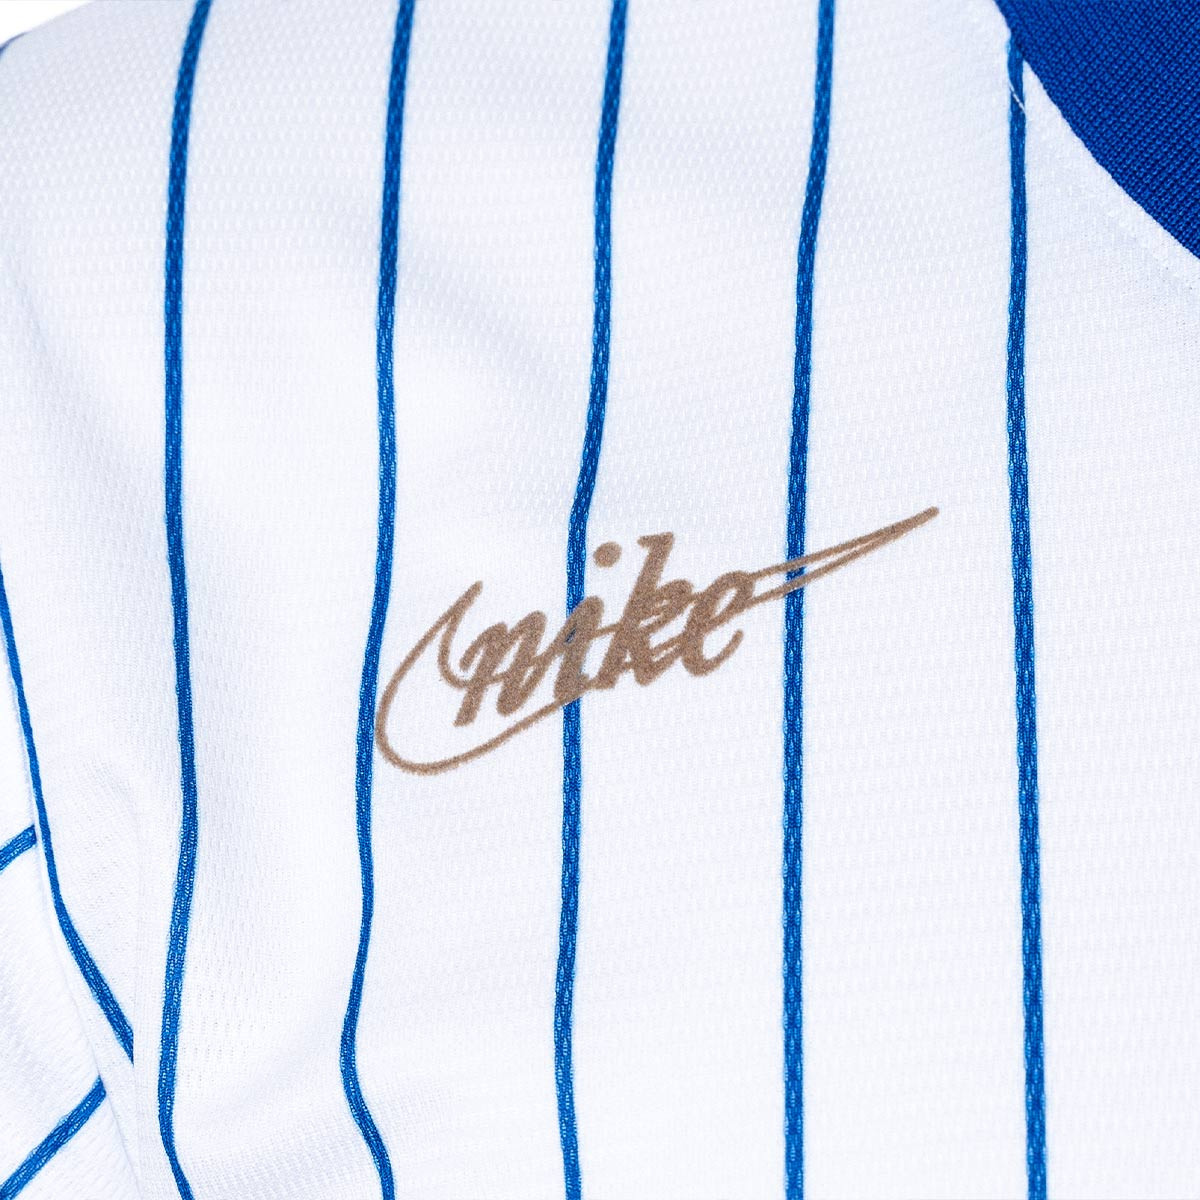 Chicago Cubs Cooperstown Collection Nike Replica MLB Pinstripe